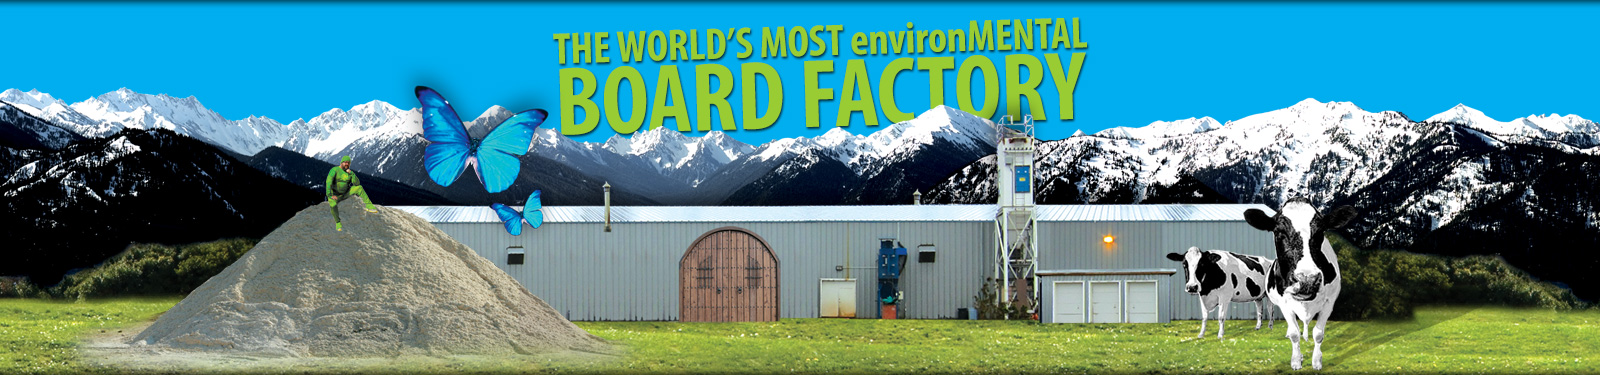 The World's Most environMENTAL Snowboard Factory